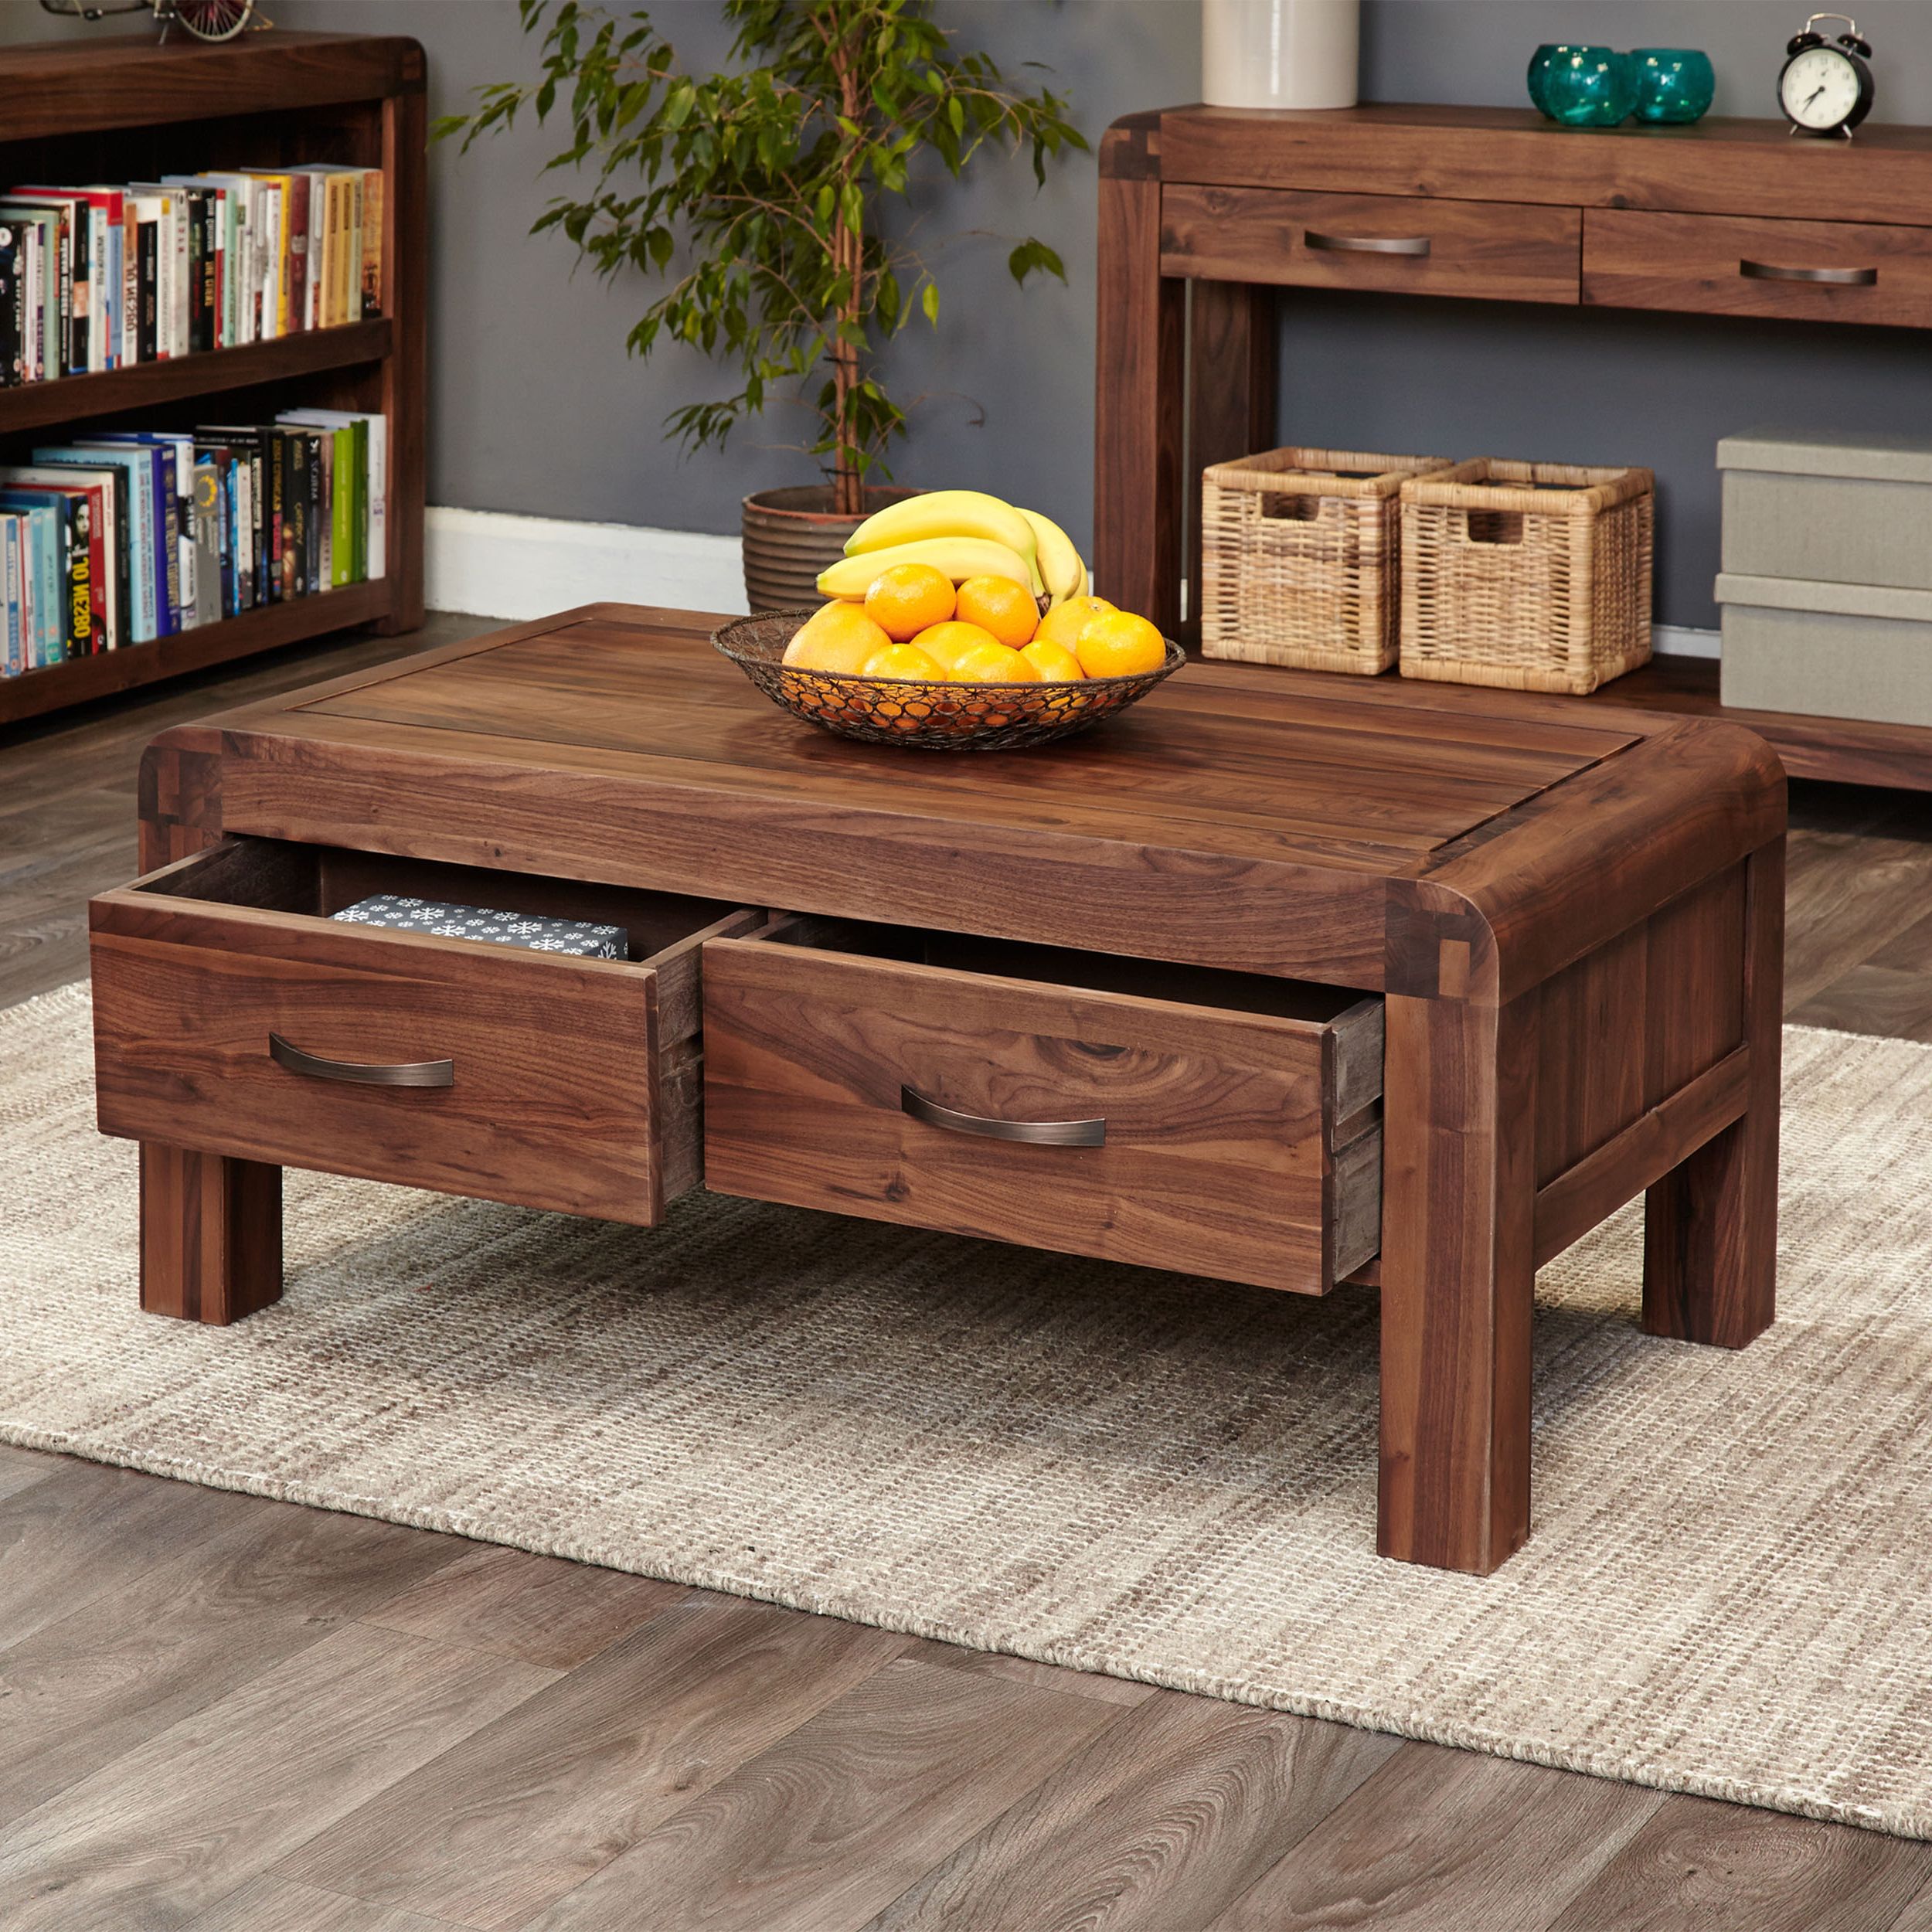 Solid Walnut Coffee Table With Storage – Shiro With Popular Wood Coffee Tables With 2 Tier Storage (View 12 of 15)